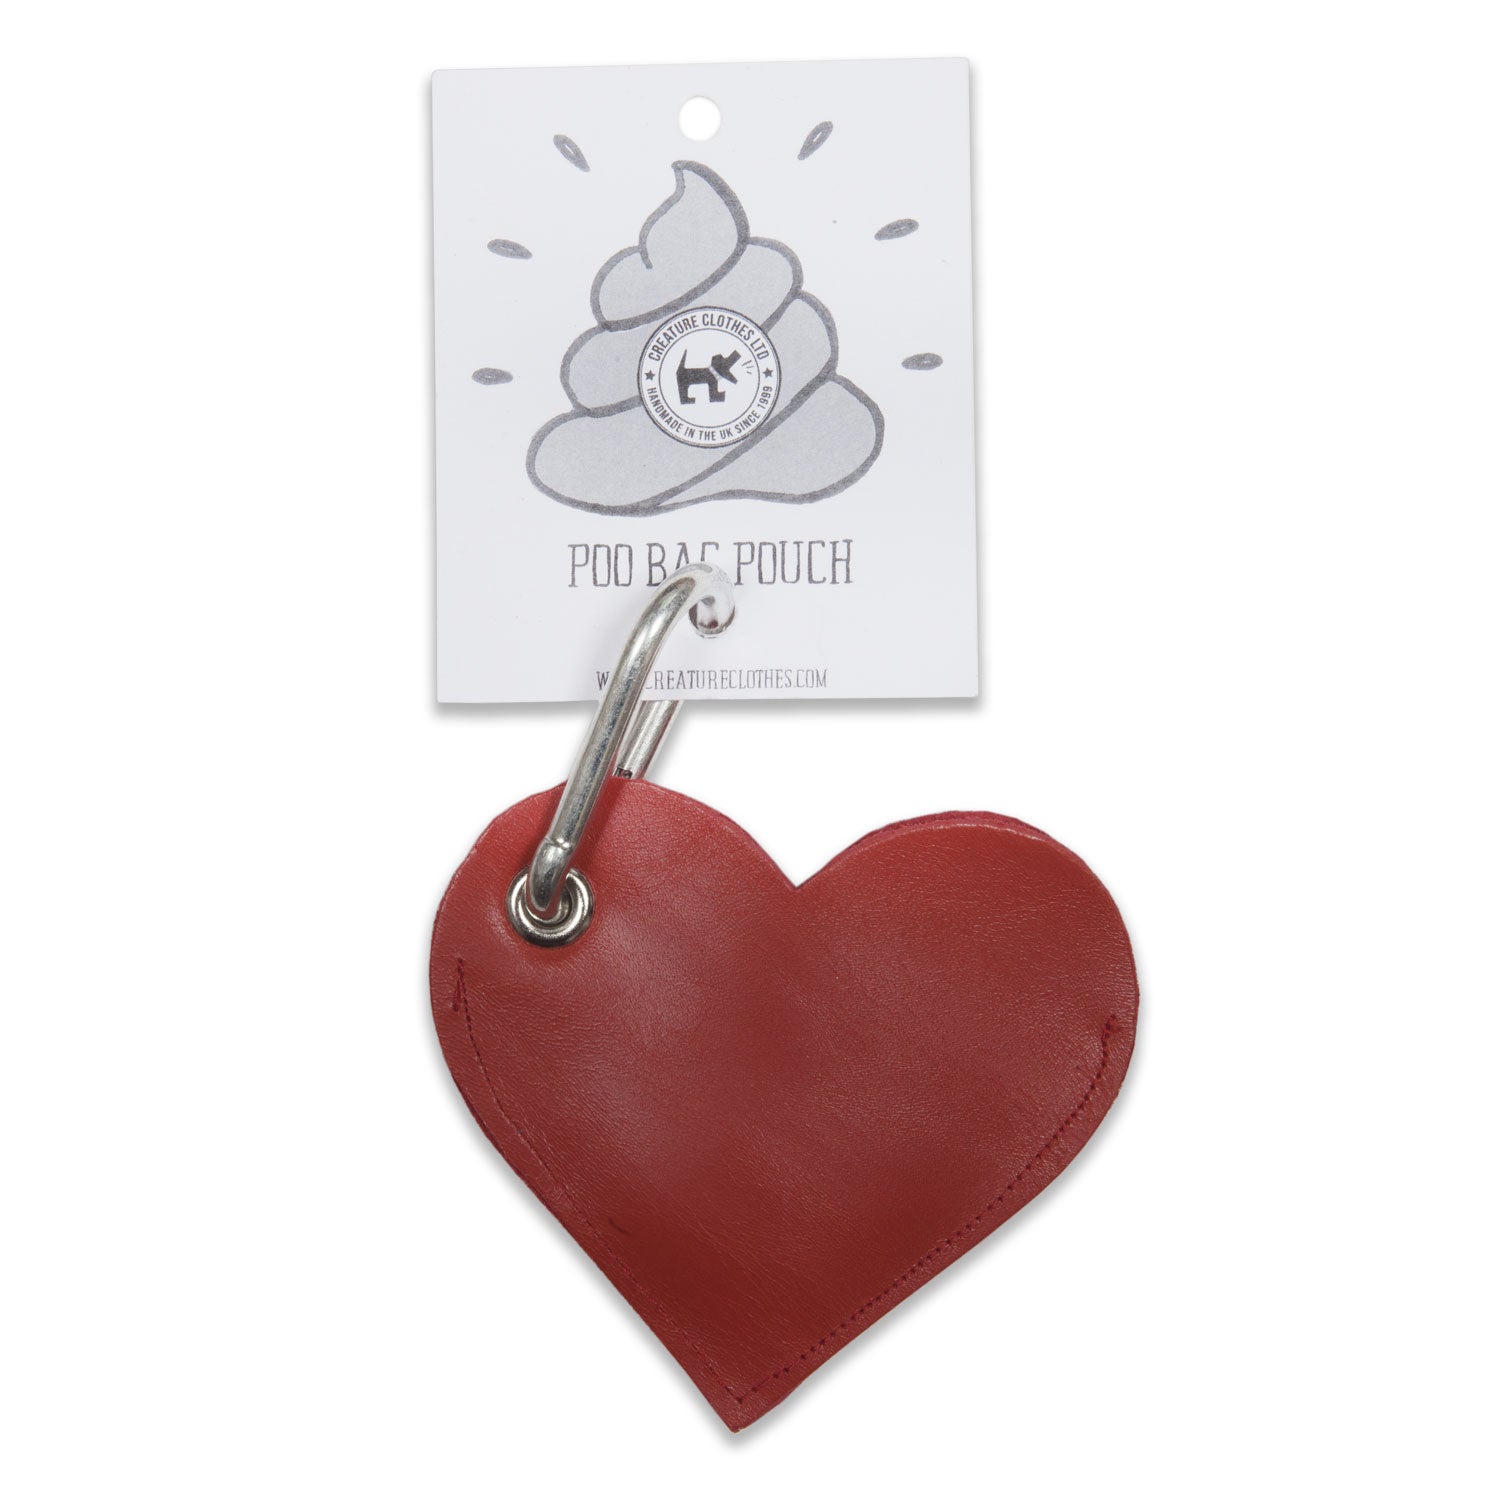 Red Heart Leather Poo Bag Pouch